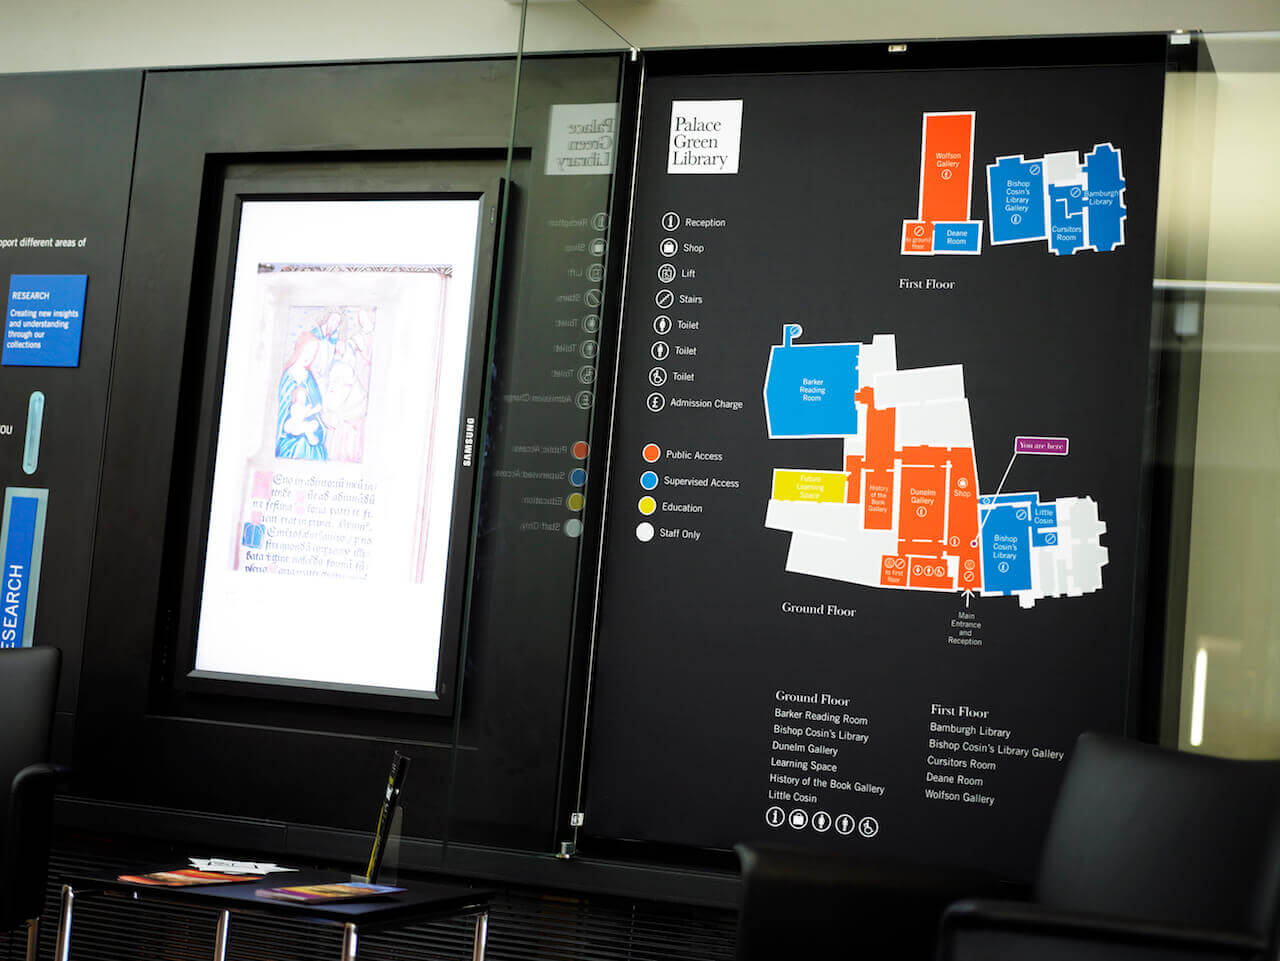 Wayfinding and environmental graphics with a map of Palace Green Library